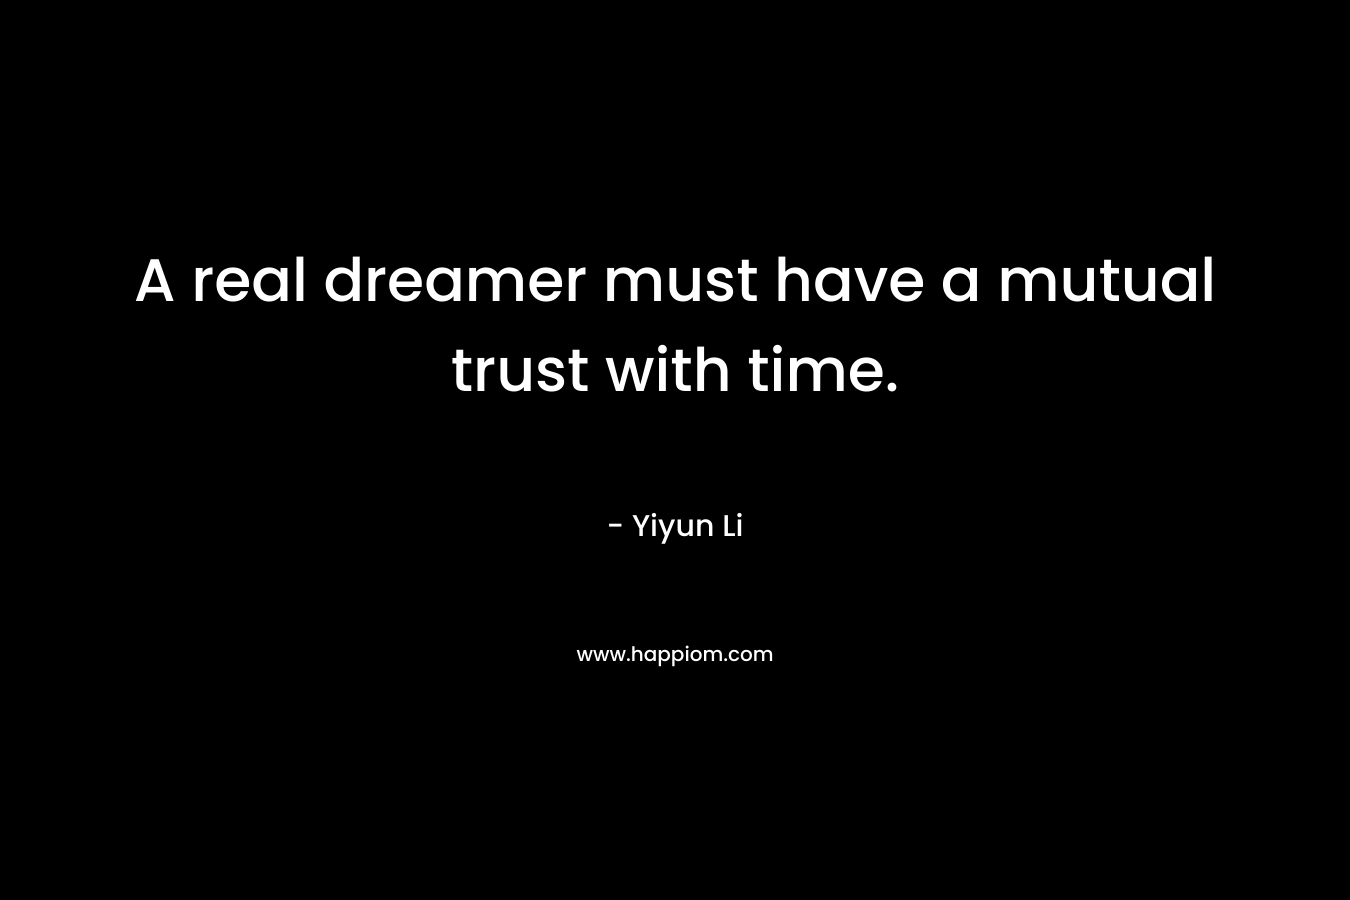 A real dreamer must have a mutual trust with time.